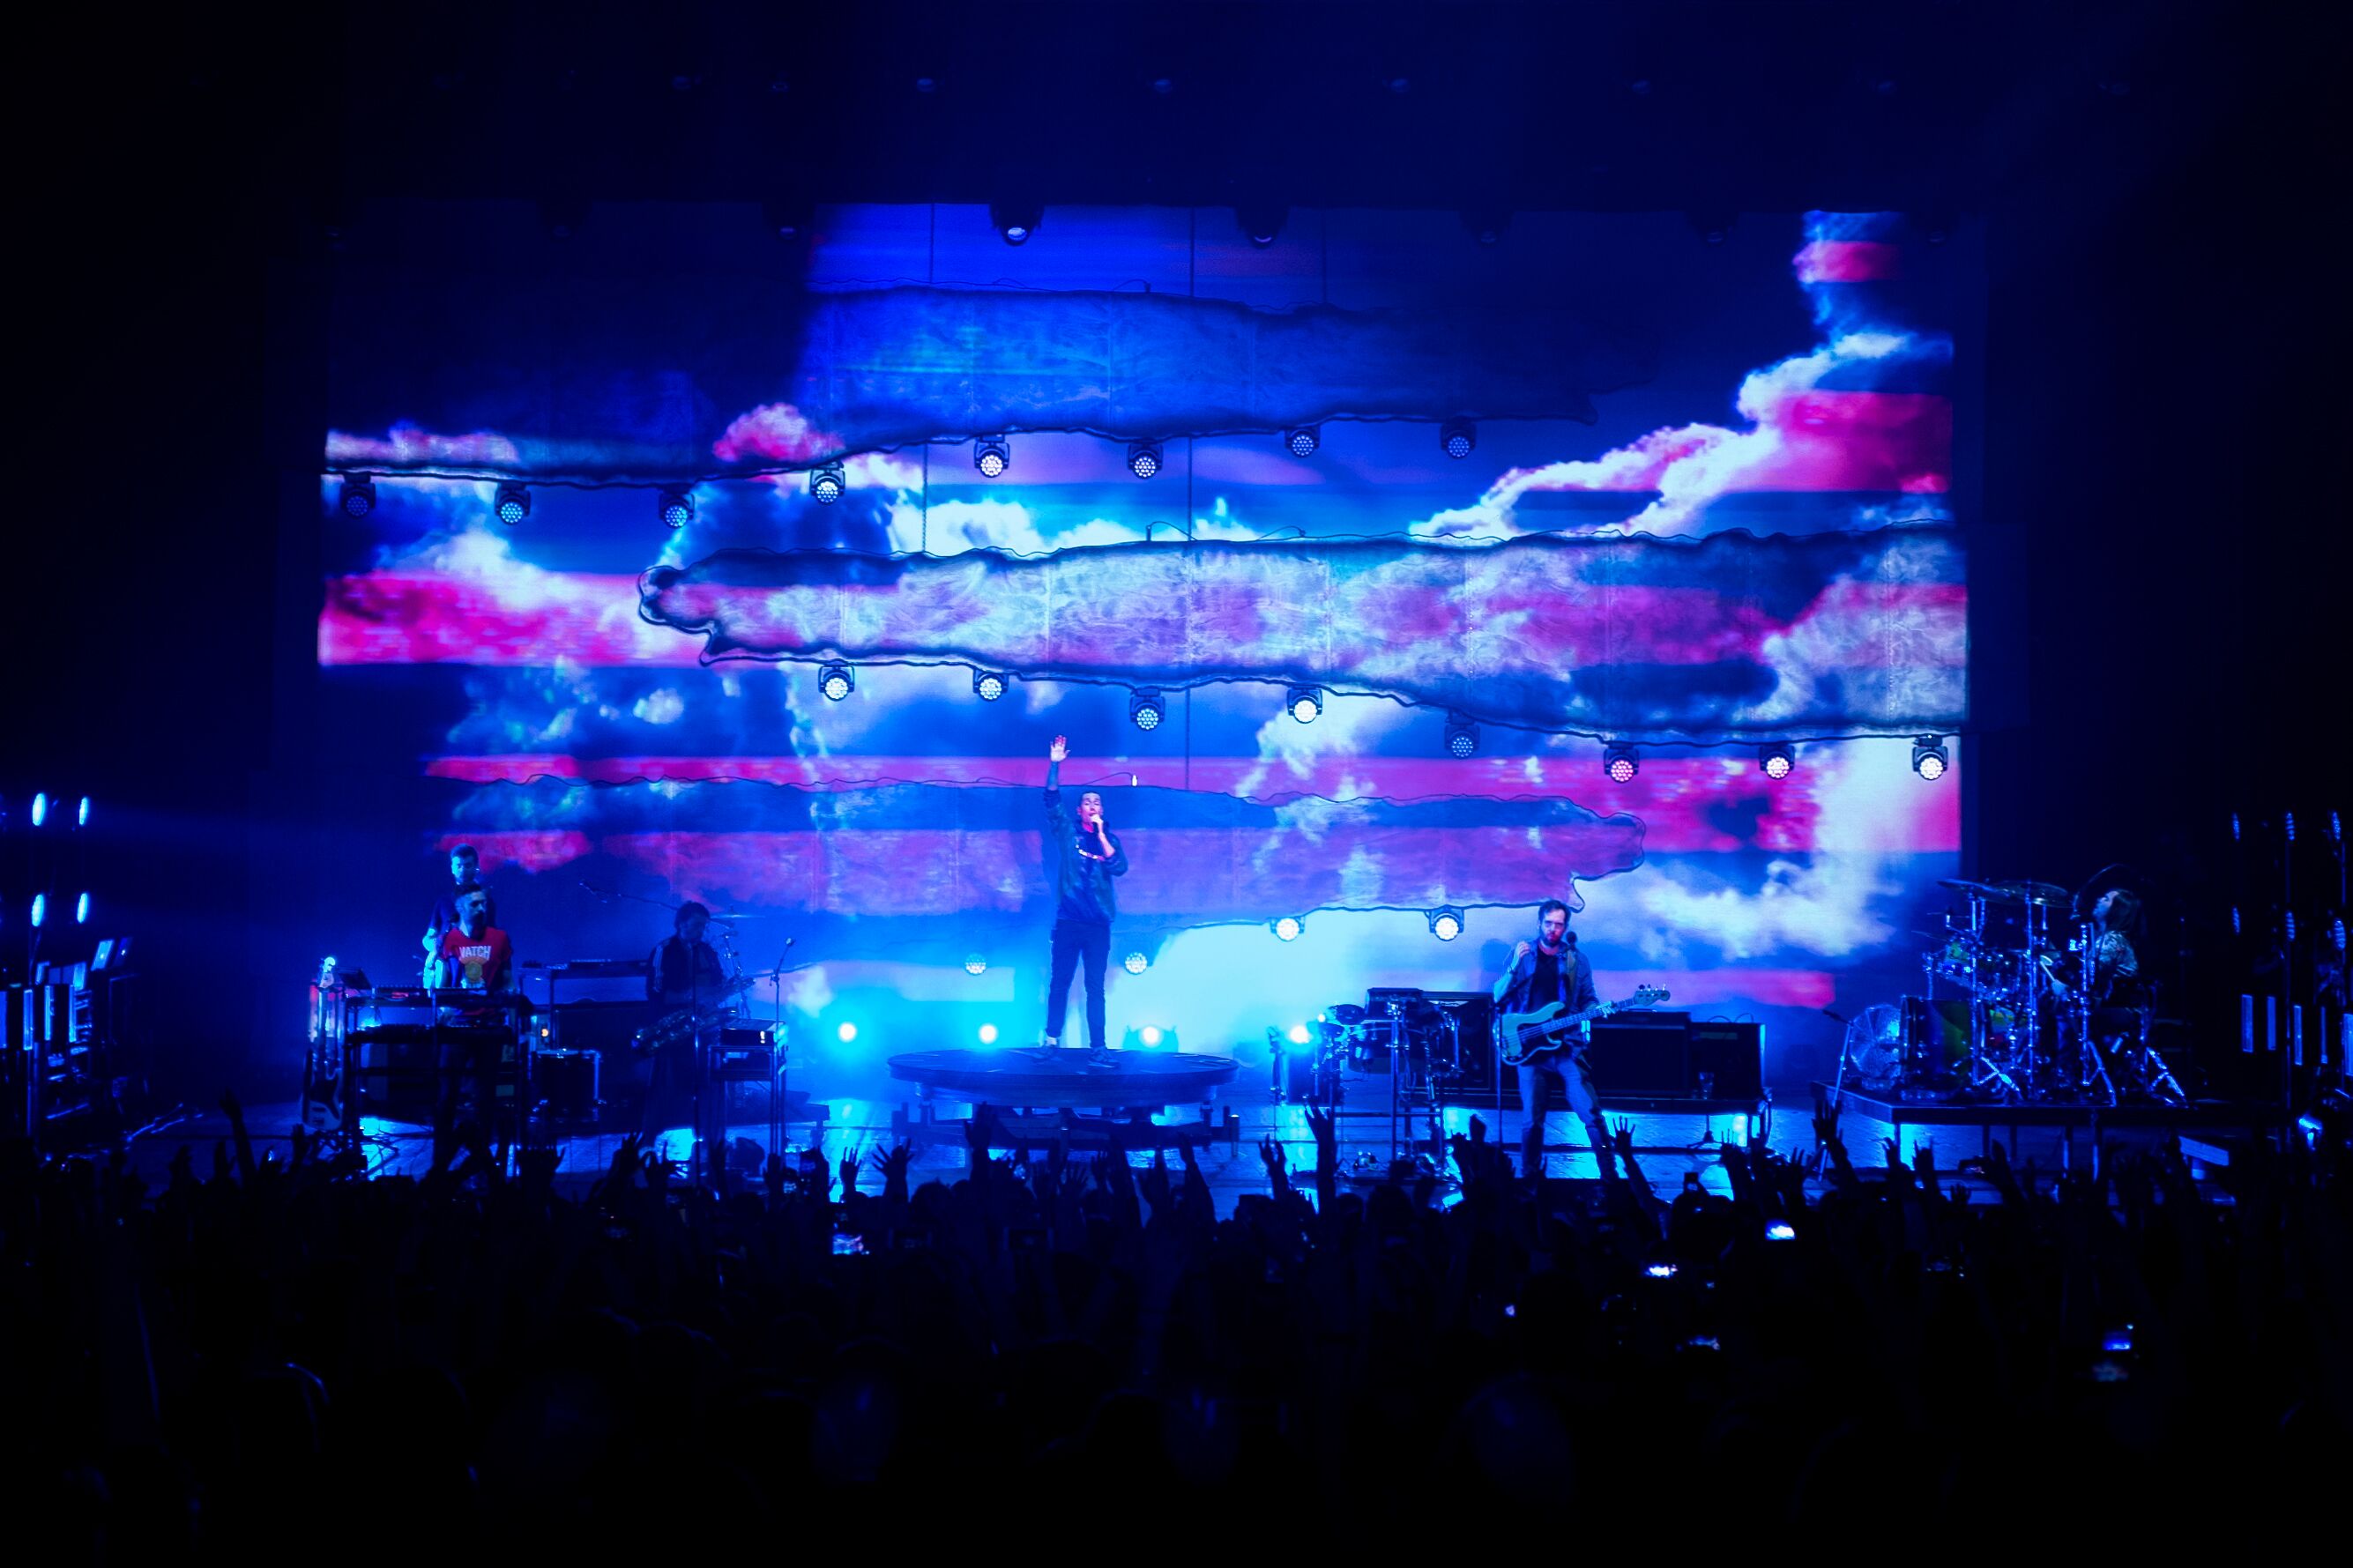 Really Creative Media projection on tour with Bastille